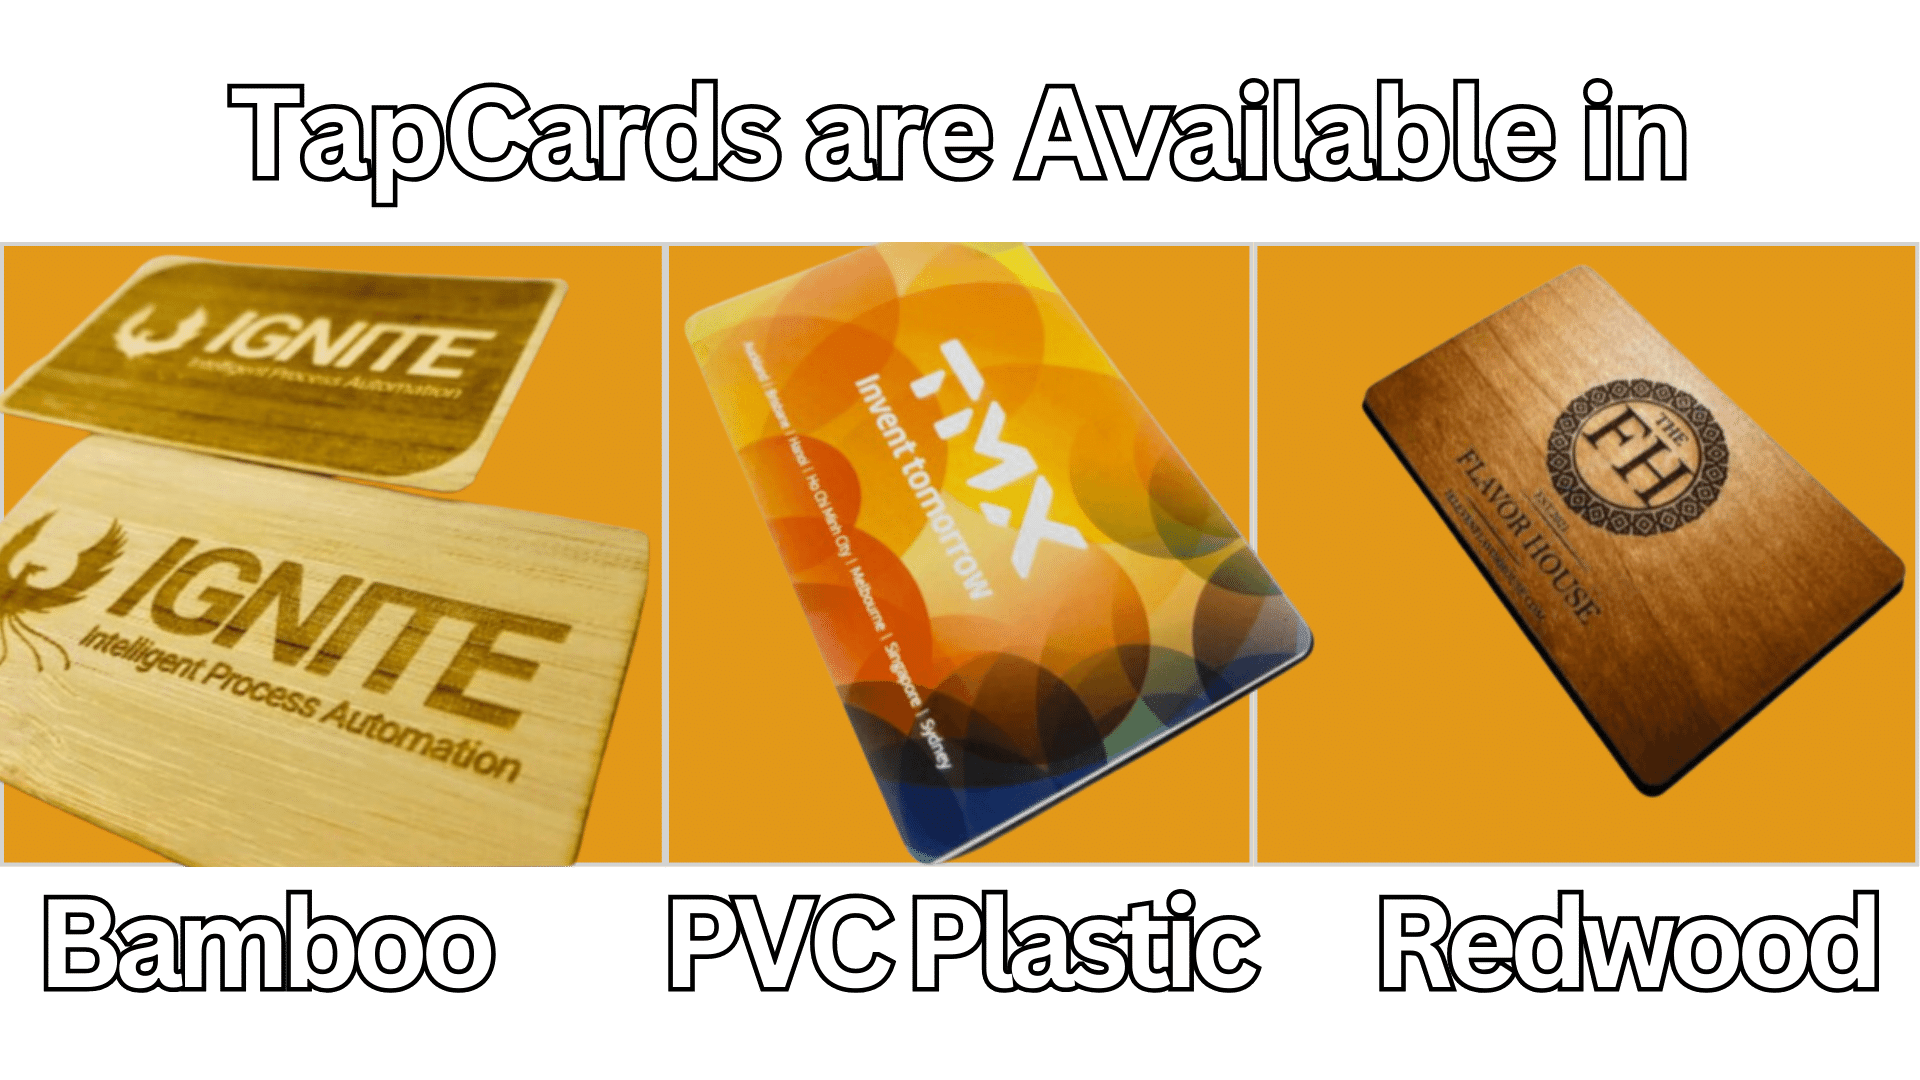 Sell 1 product with the Standard TapCard. Sell 10 products with the Premium TapCard. Available in Bamboo, Redwood and PVC Plastic.